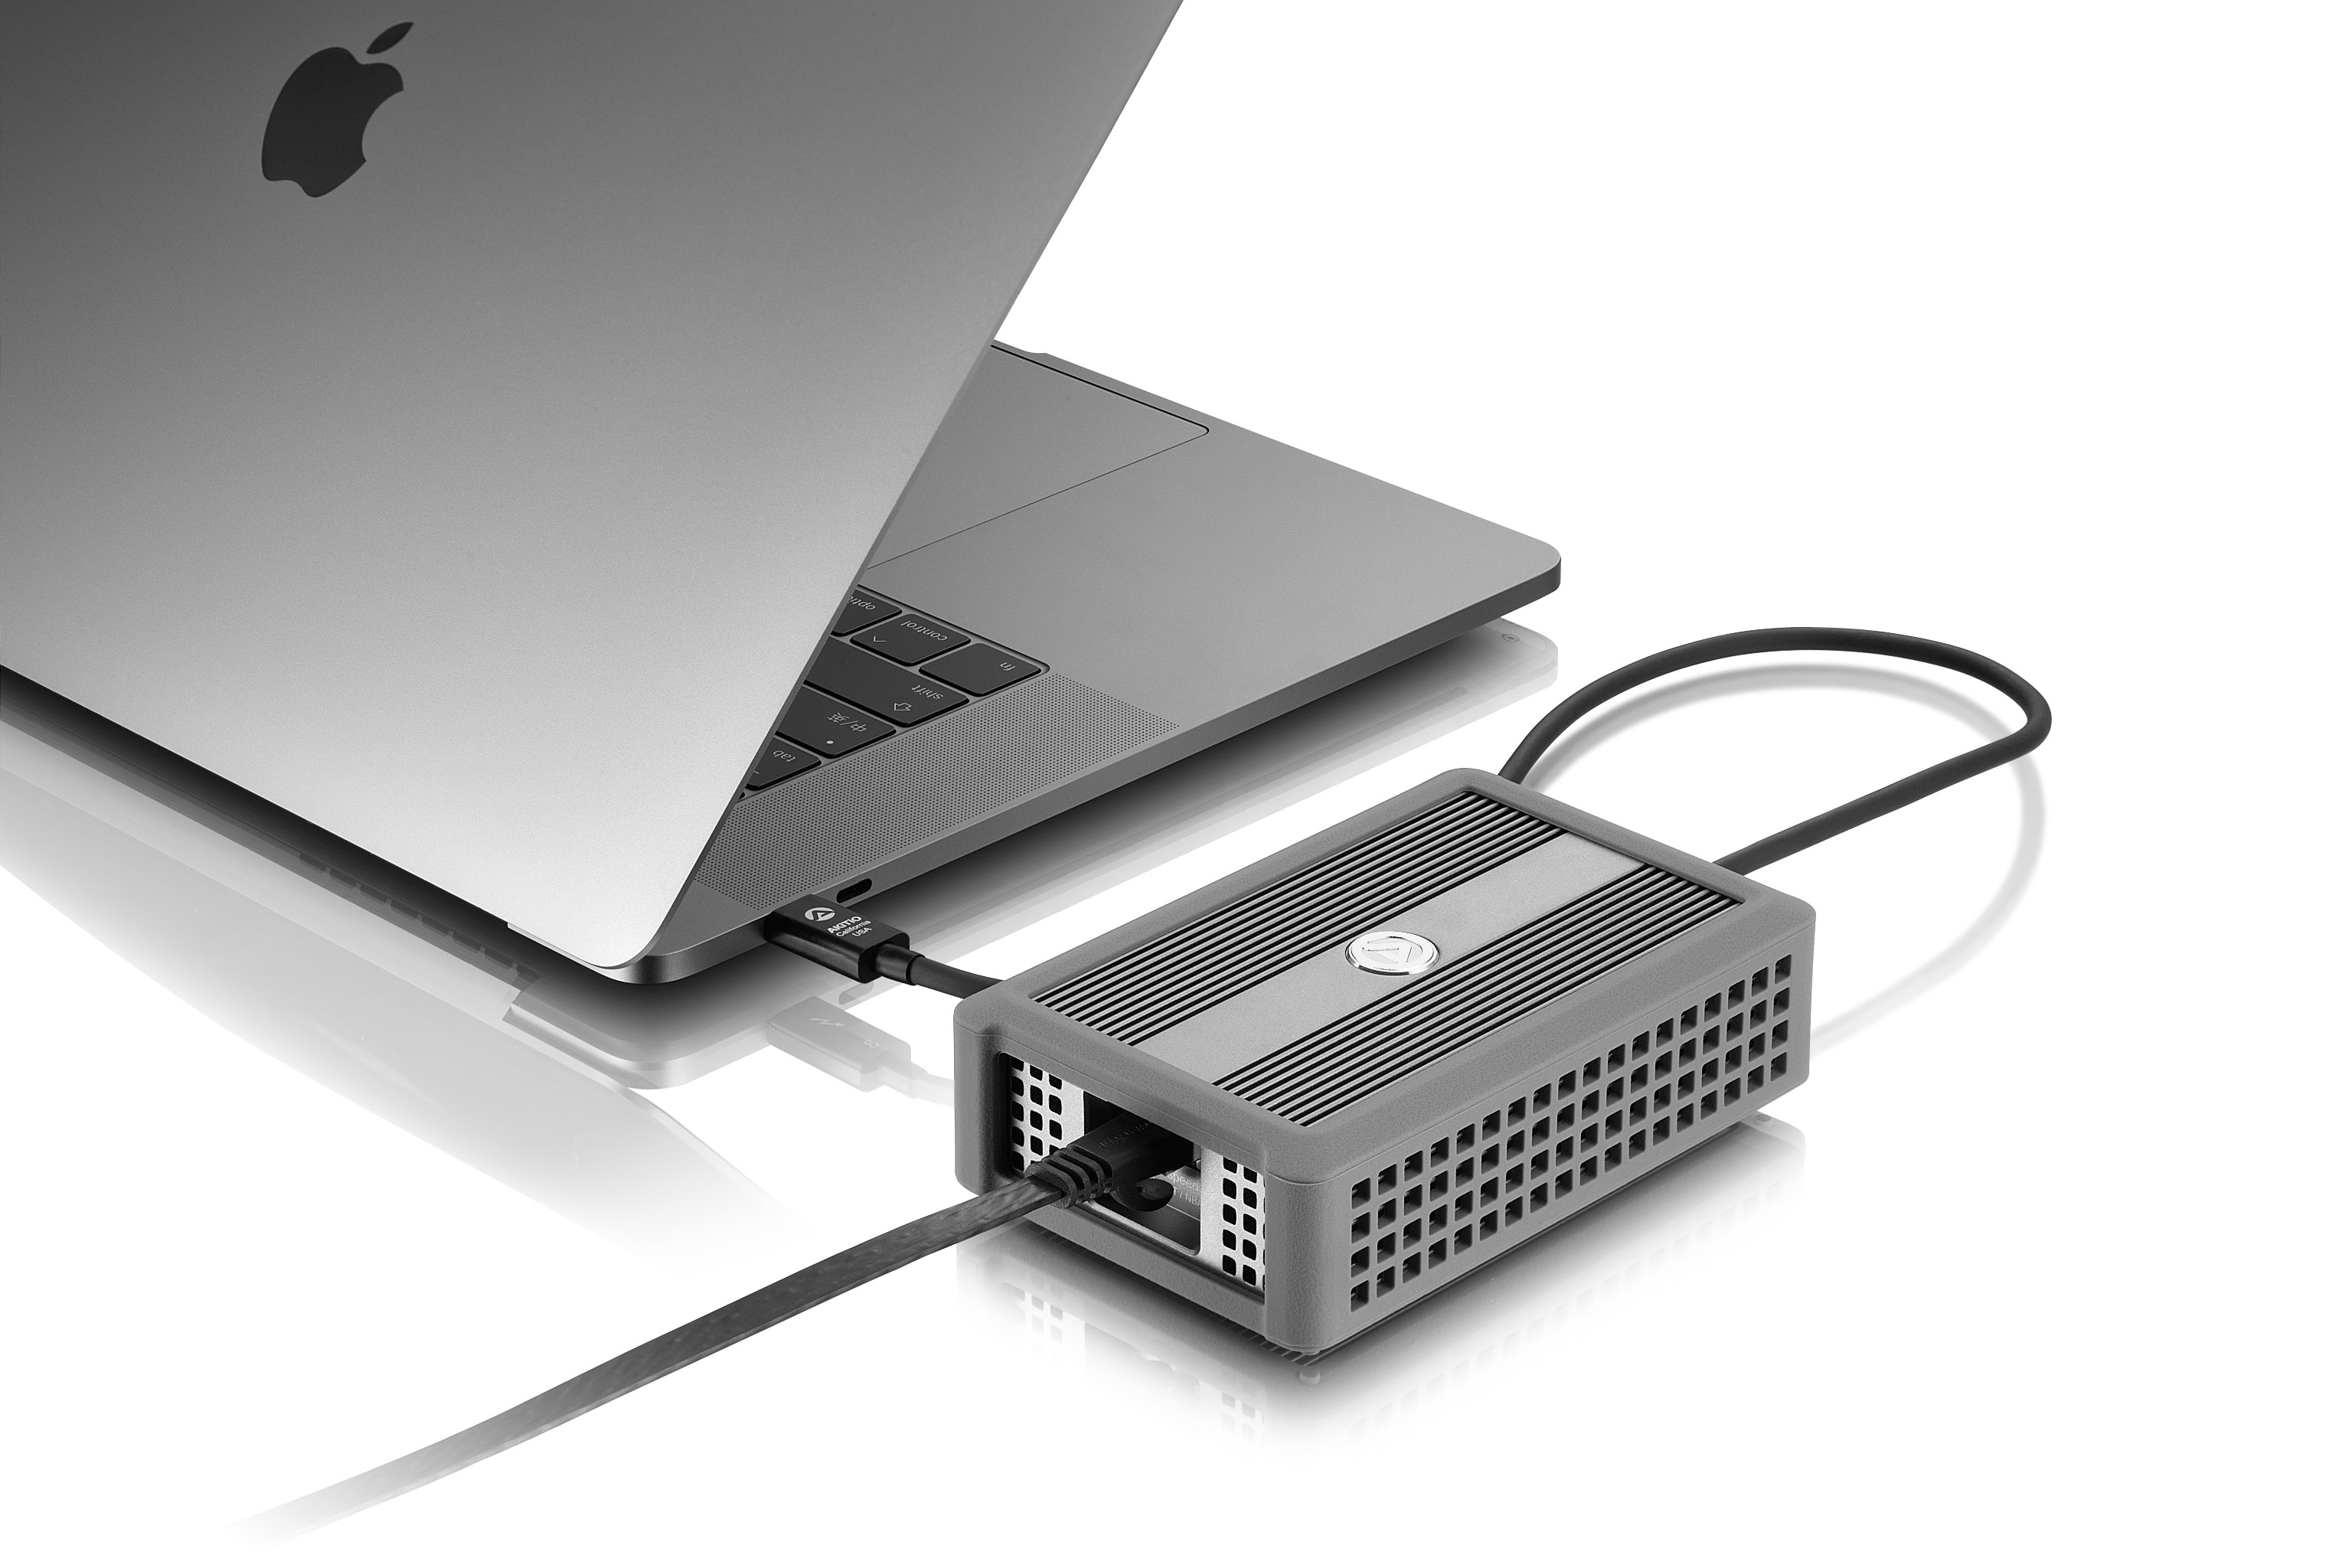 Usb 10 гб. Адаптер Thunderbolt 3 Ethernet. Thunderbolt 3 Ethernet 10gb. MACBOOK Thunderbolt 3. Thunderbolt 3 to 10gbase-t Ethernet Adapter.